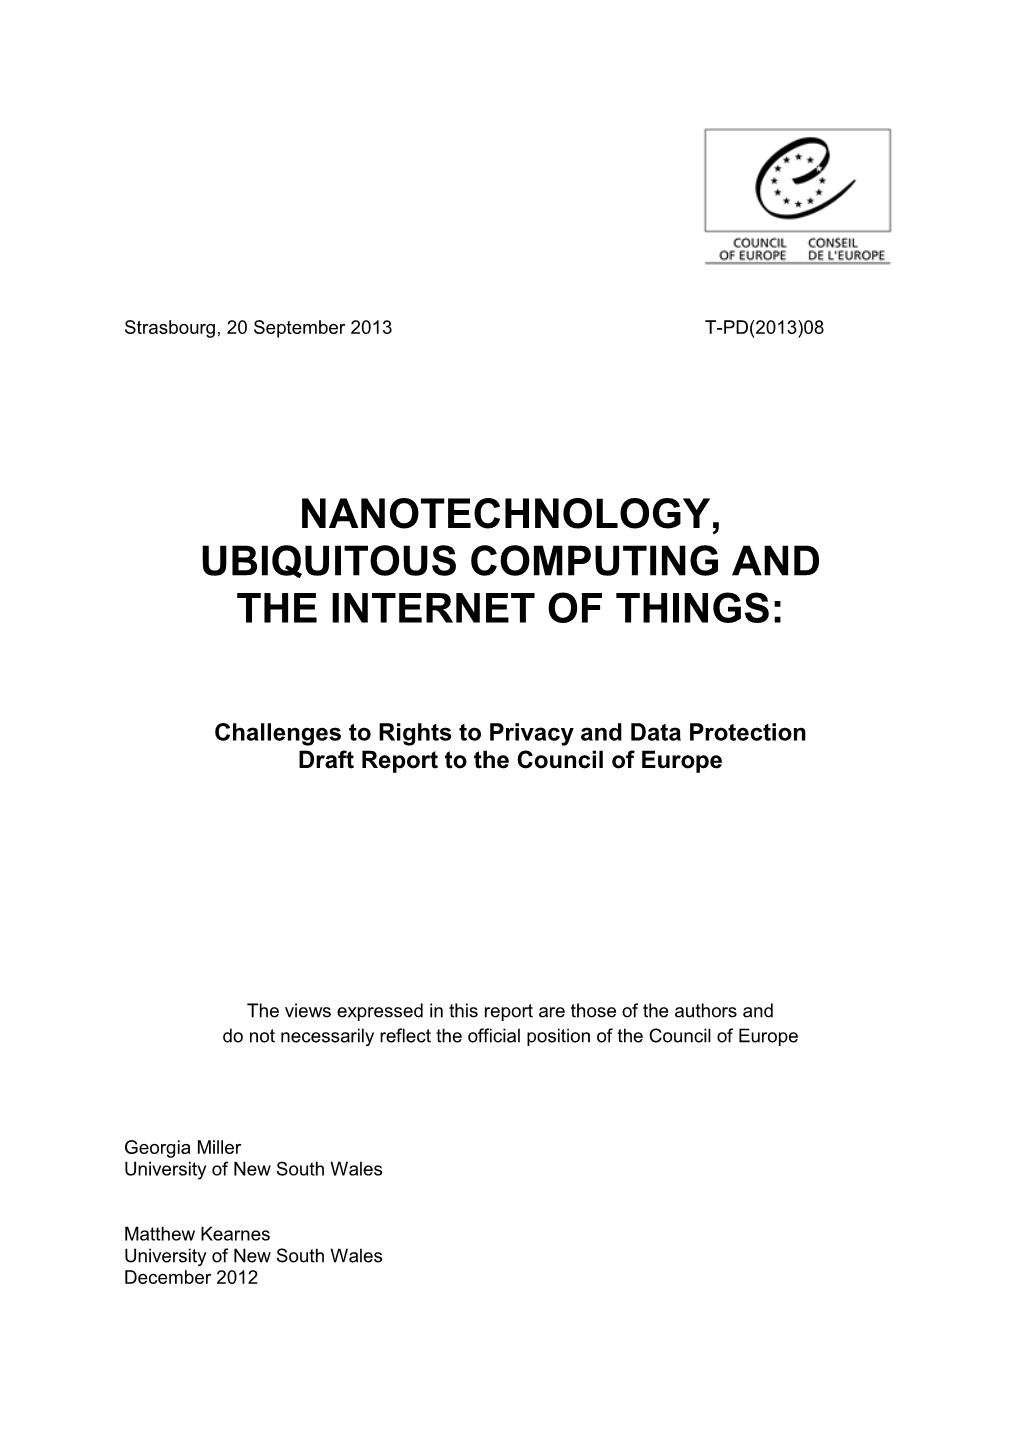 Nanotechnology, Ubiquitous Computing and the Internet of Things